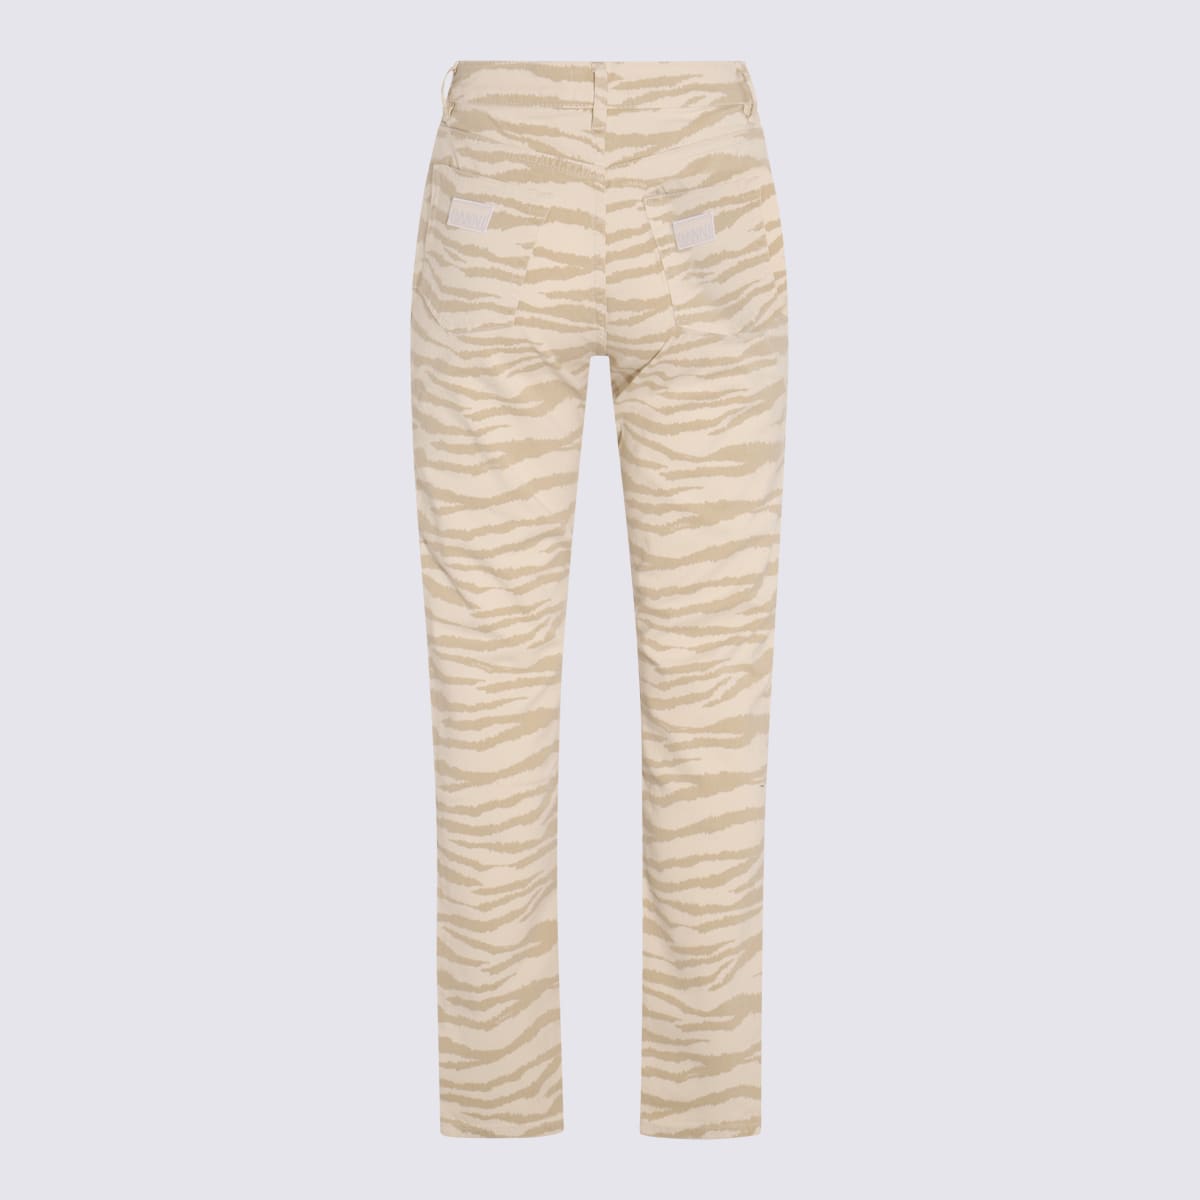 Cream And Beige Cotton Blend Swigy Jeans